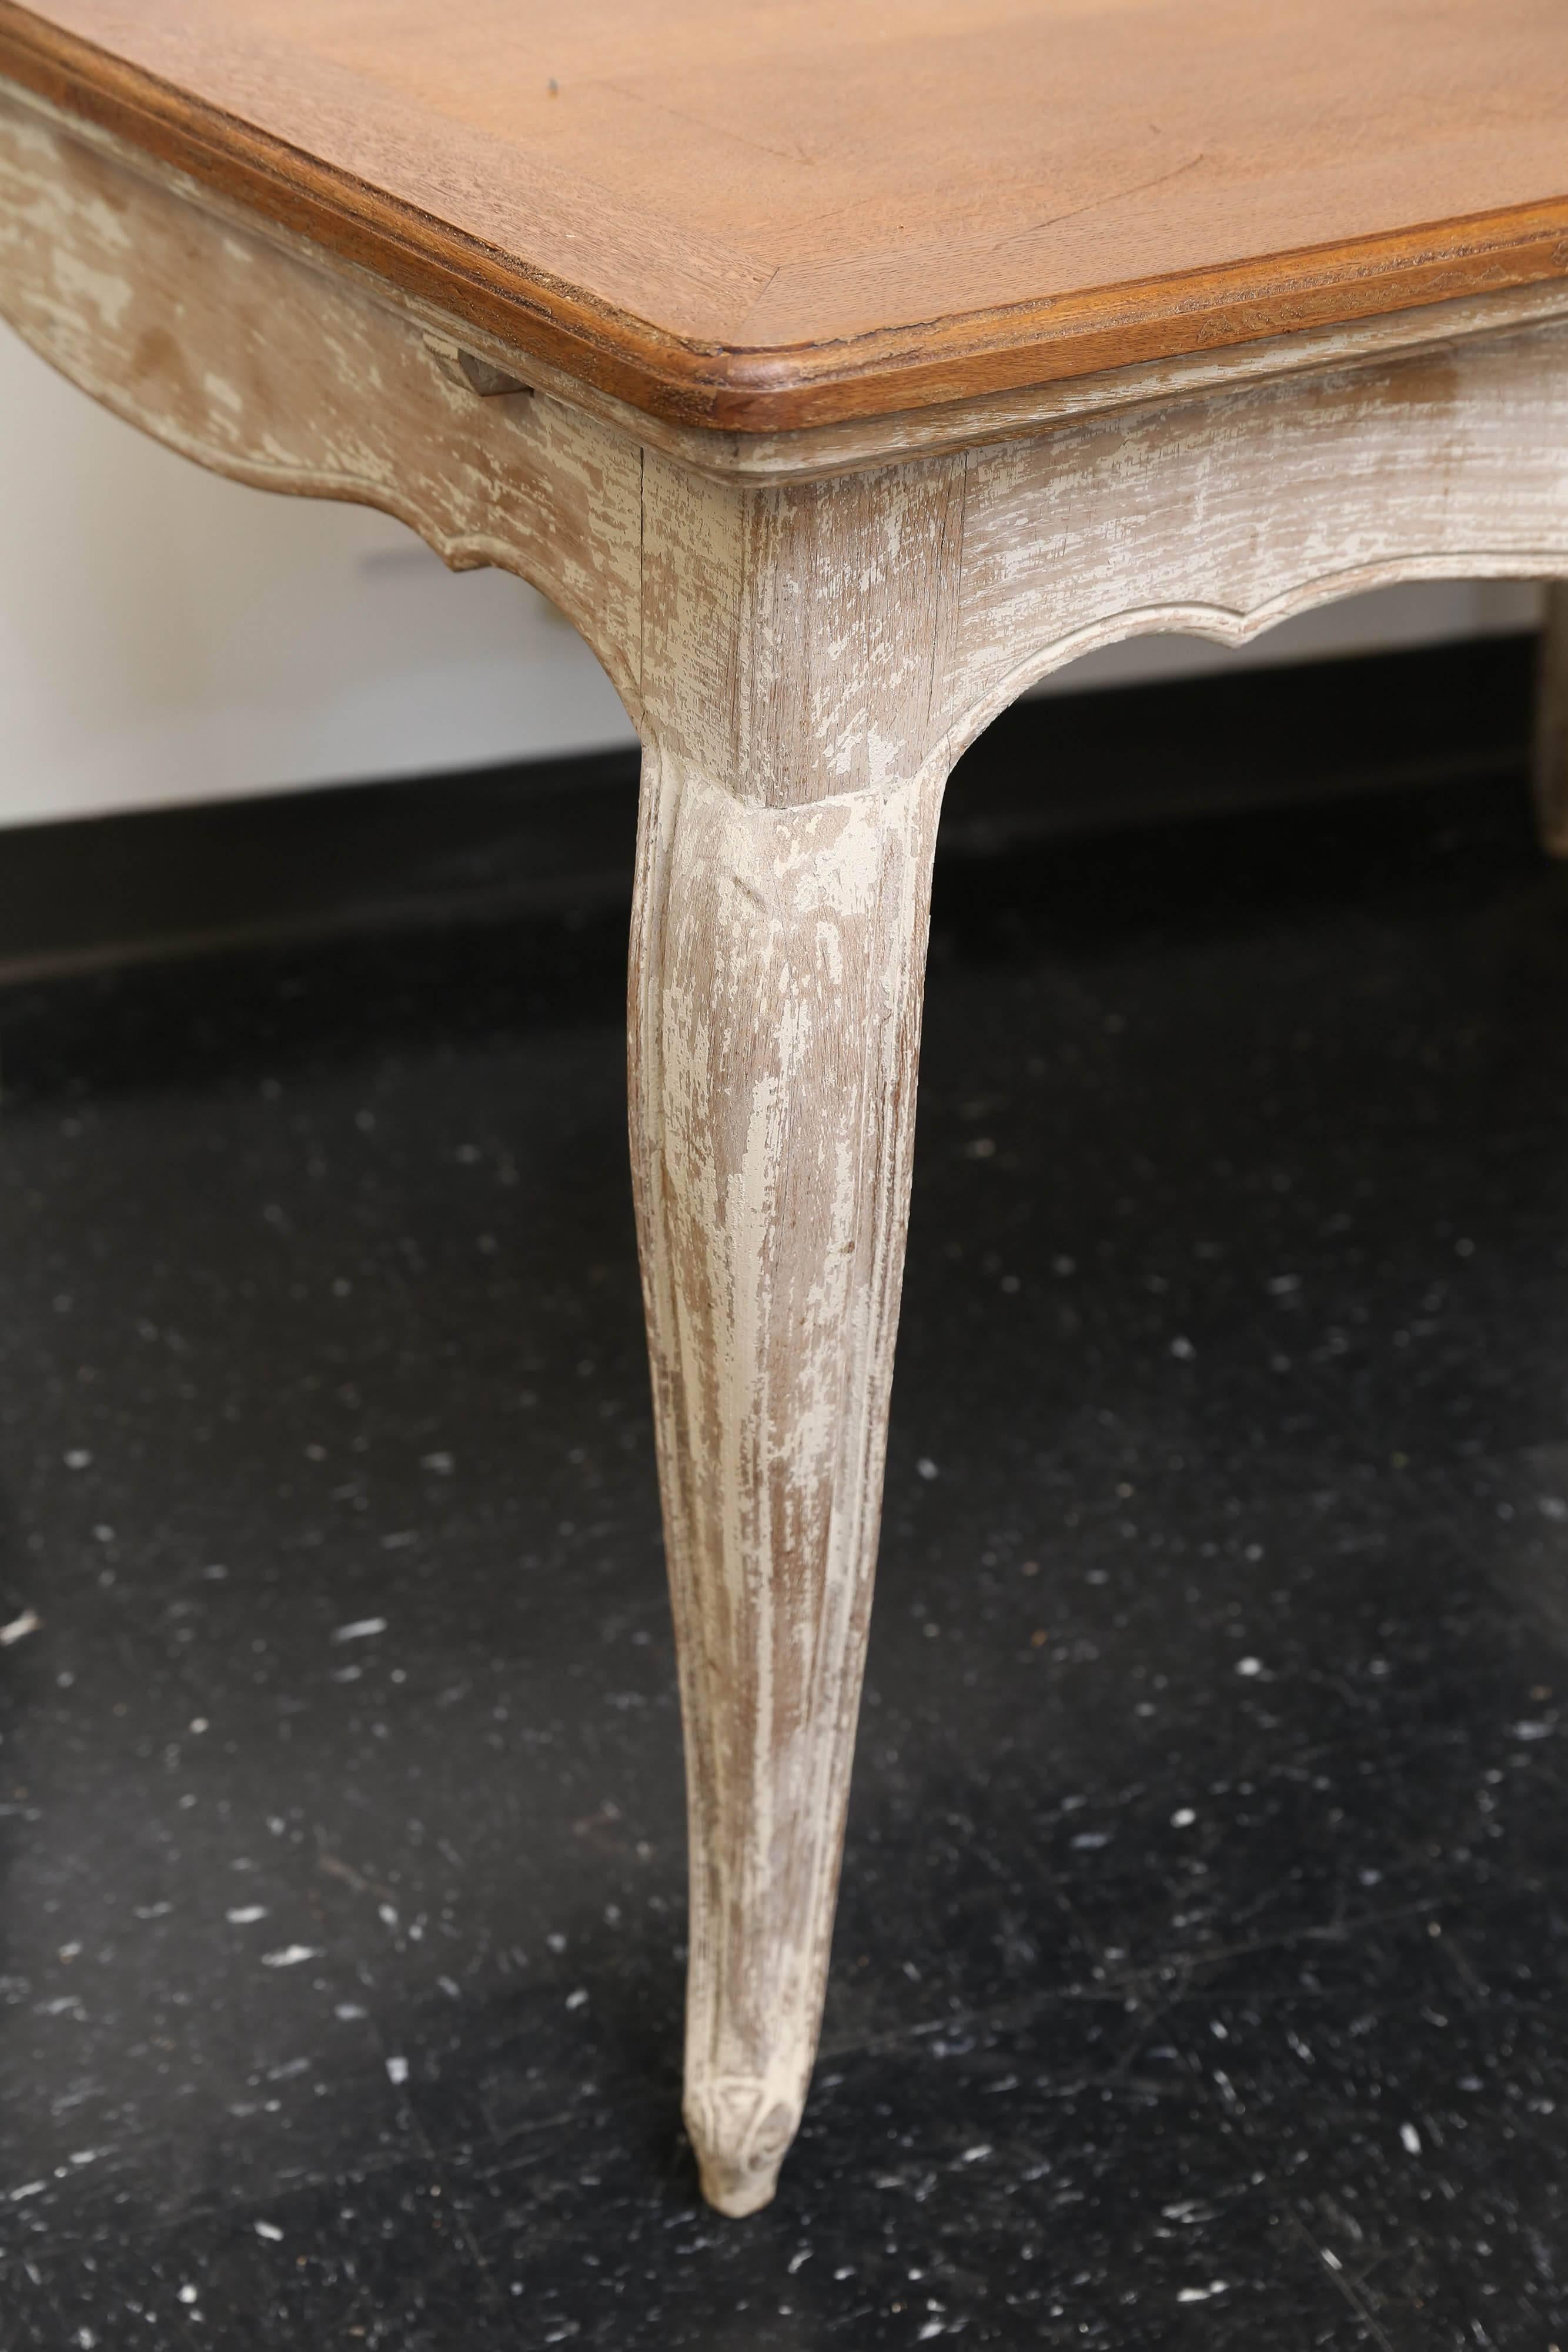 Early 20th century French table with a waxed top and a scraped paint base. There are two pull-out extensions under the top that are in scraped paint. Height to apron is 24